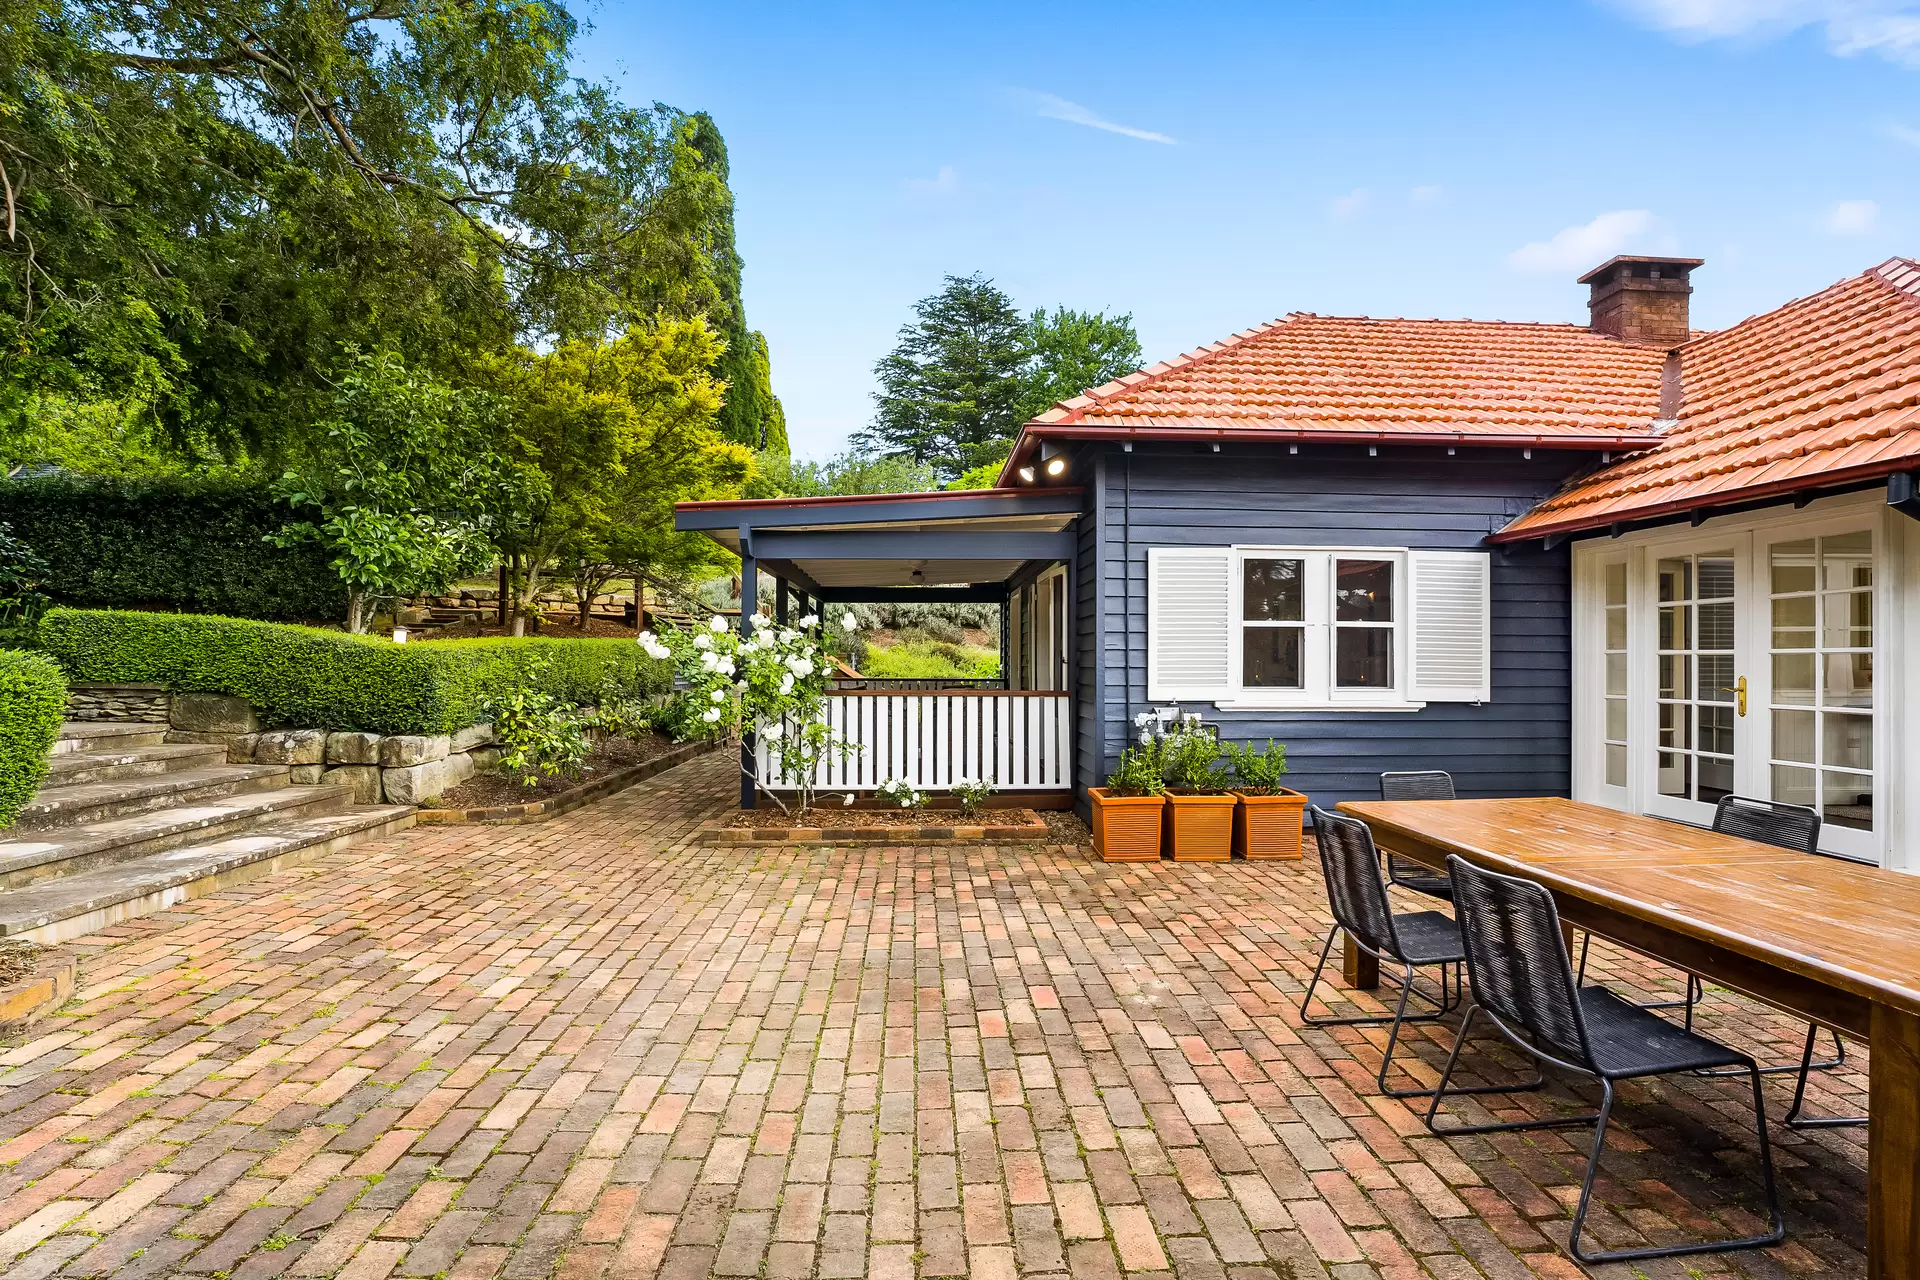 Photo #13: 119-127 Merrigang Street, Bowral - Sold by Drew Lindsay Sotheby's International Realty